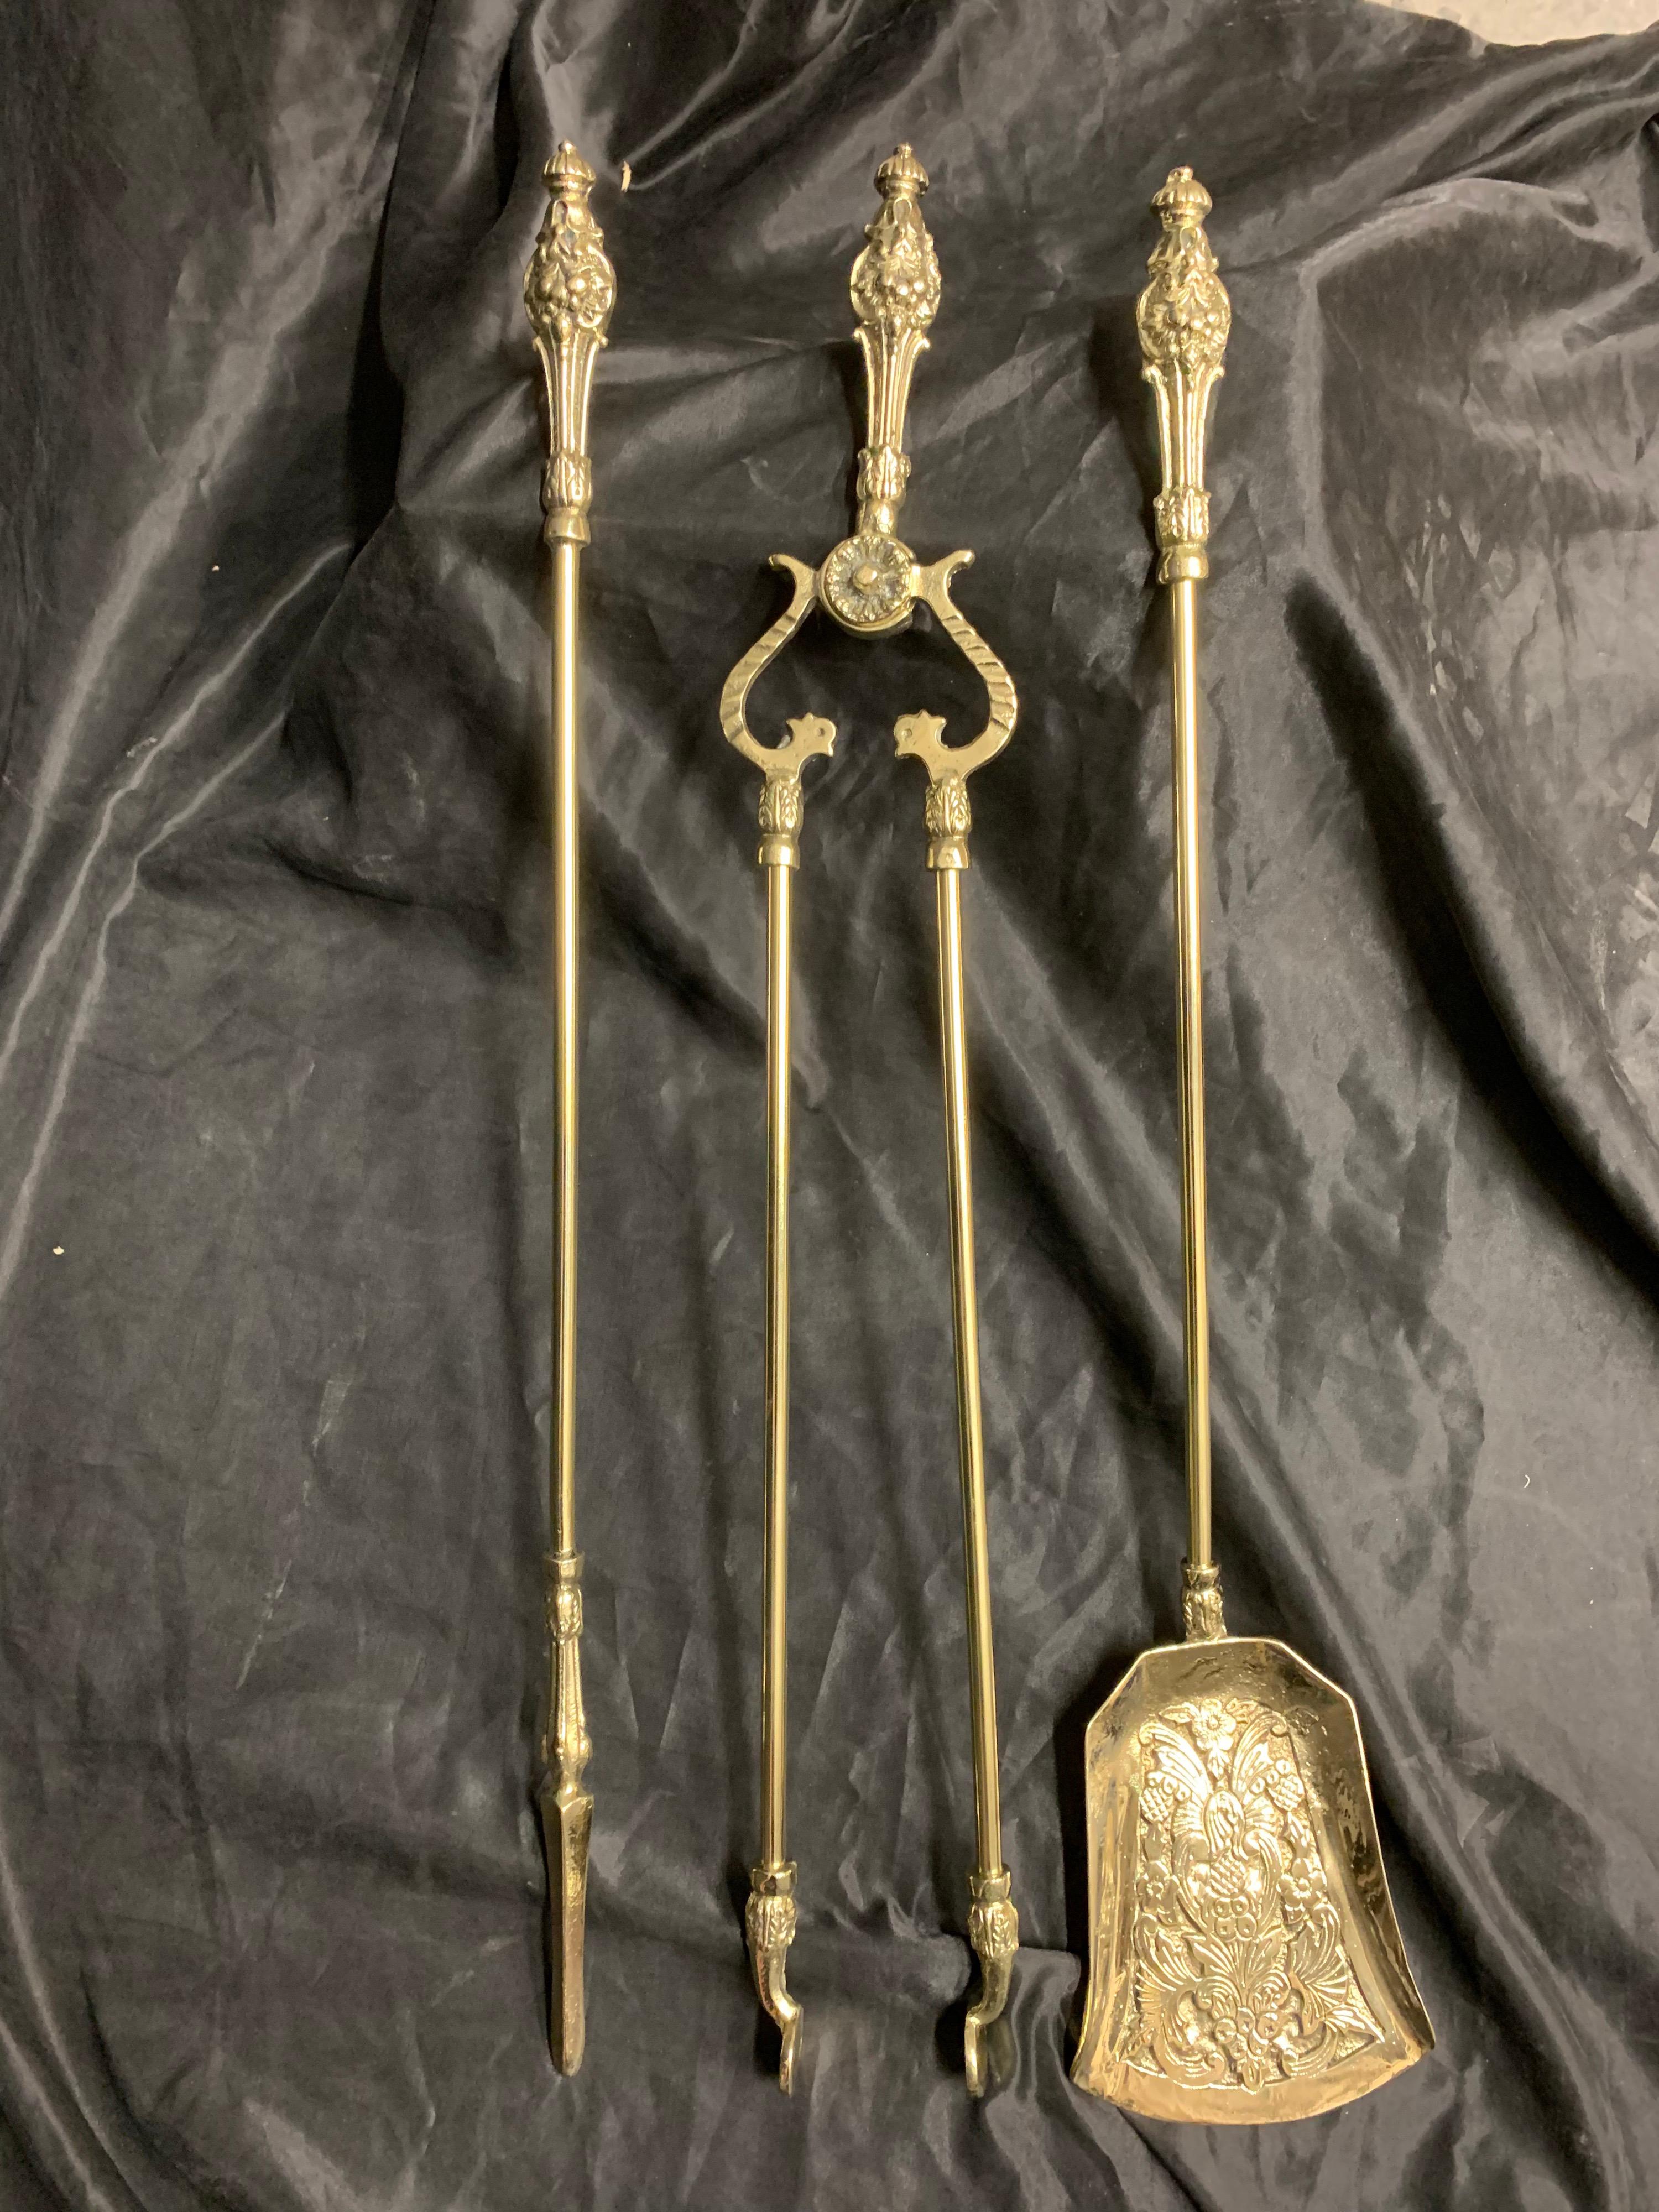 A set of three 19th century Victorian polished brass fire iron tools consisting of a poker, a decoratively cast shovel, and a pair of tongs with a snake style hilt, each with an ornate classically cast handle with button top finials.

English